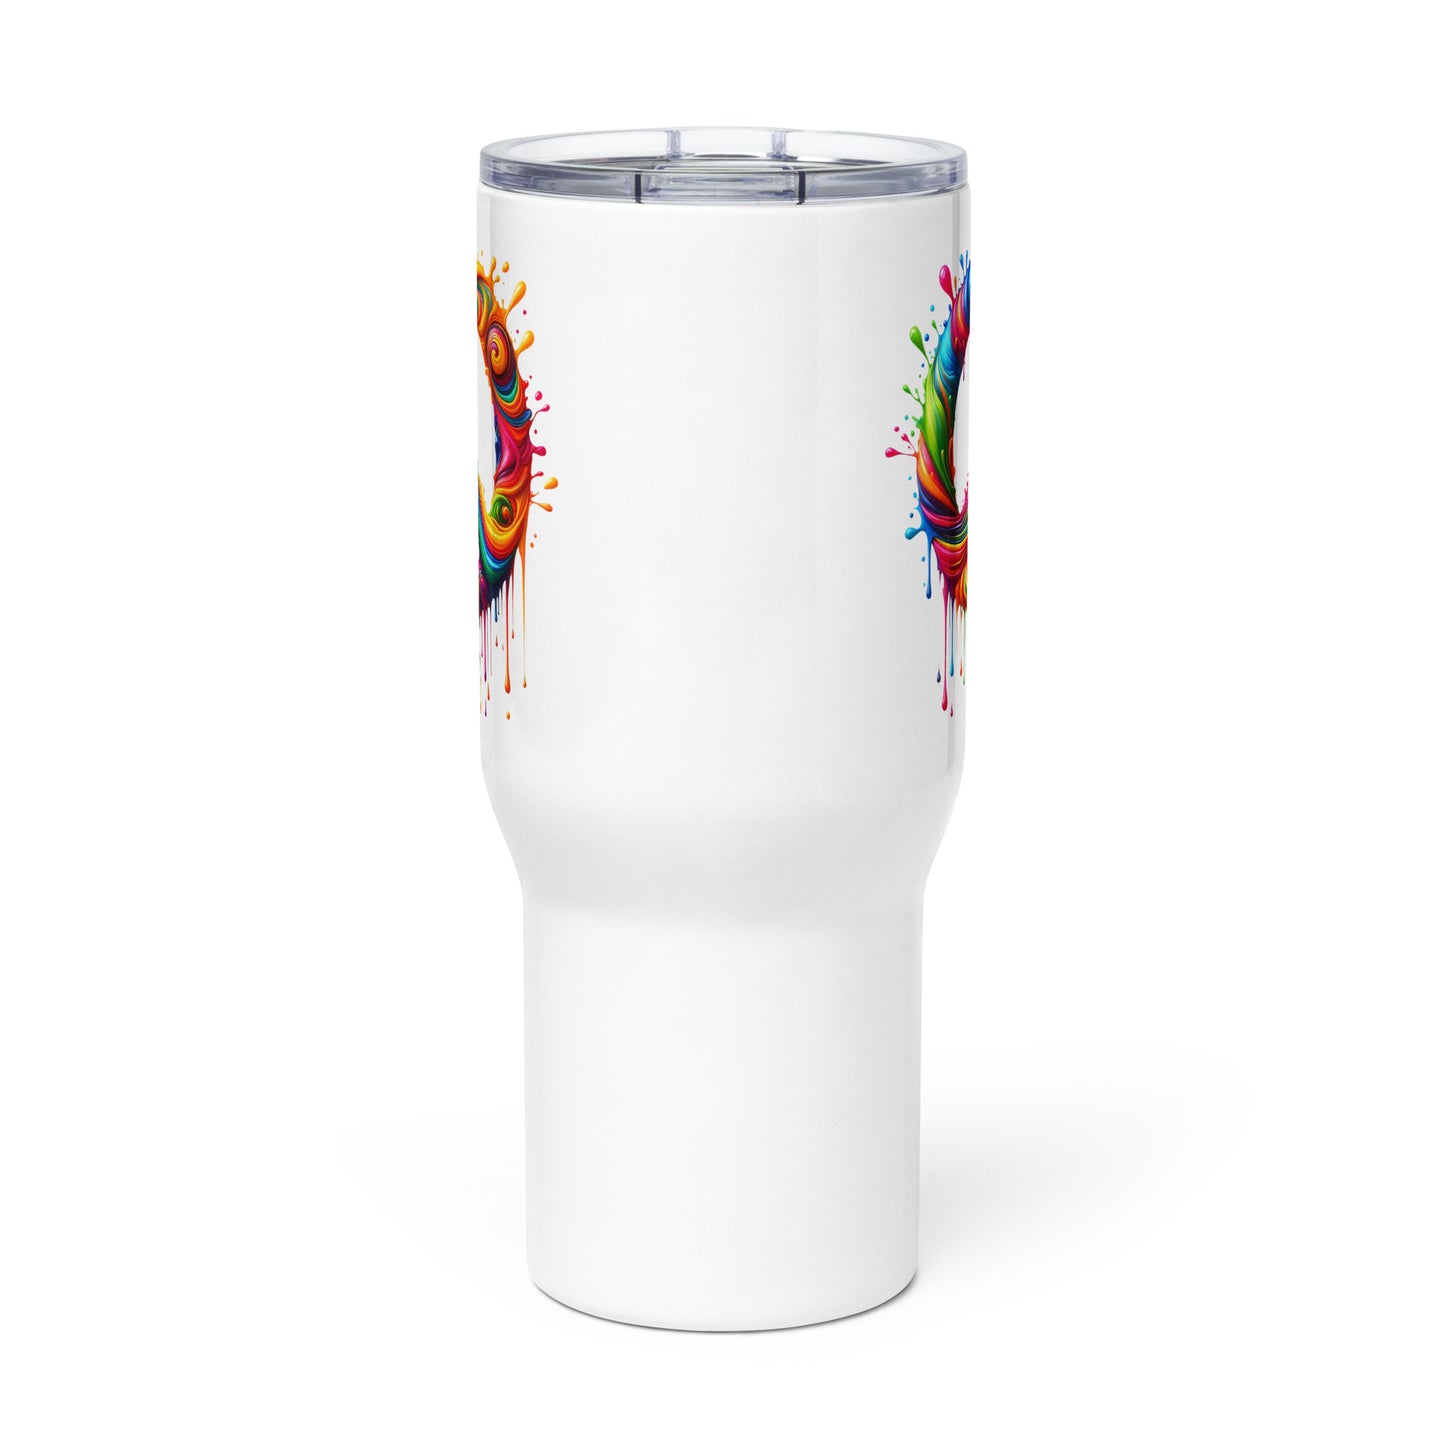 Dripping Colors of Peace Travel Mug